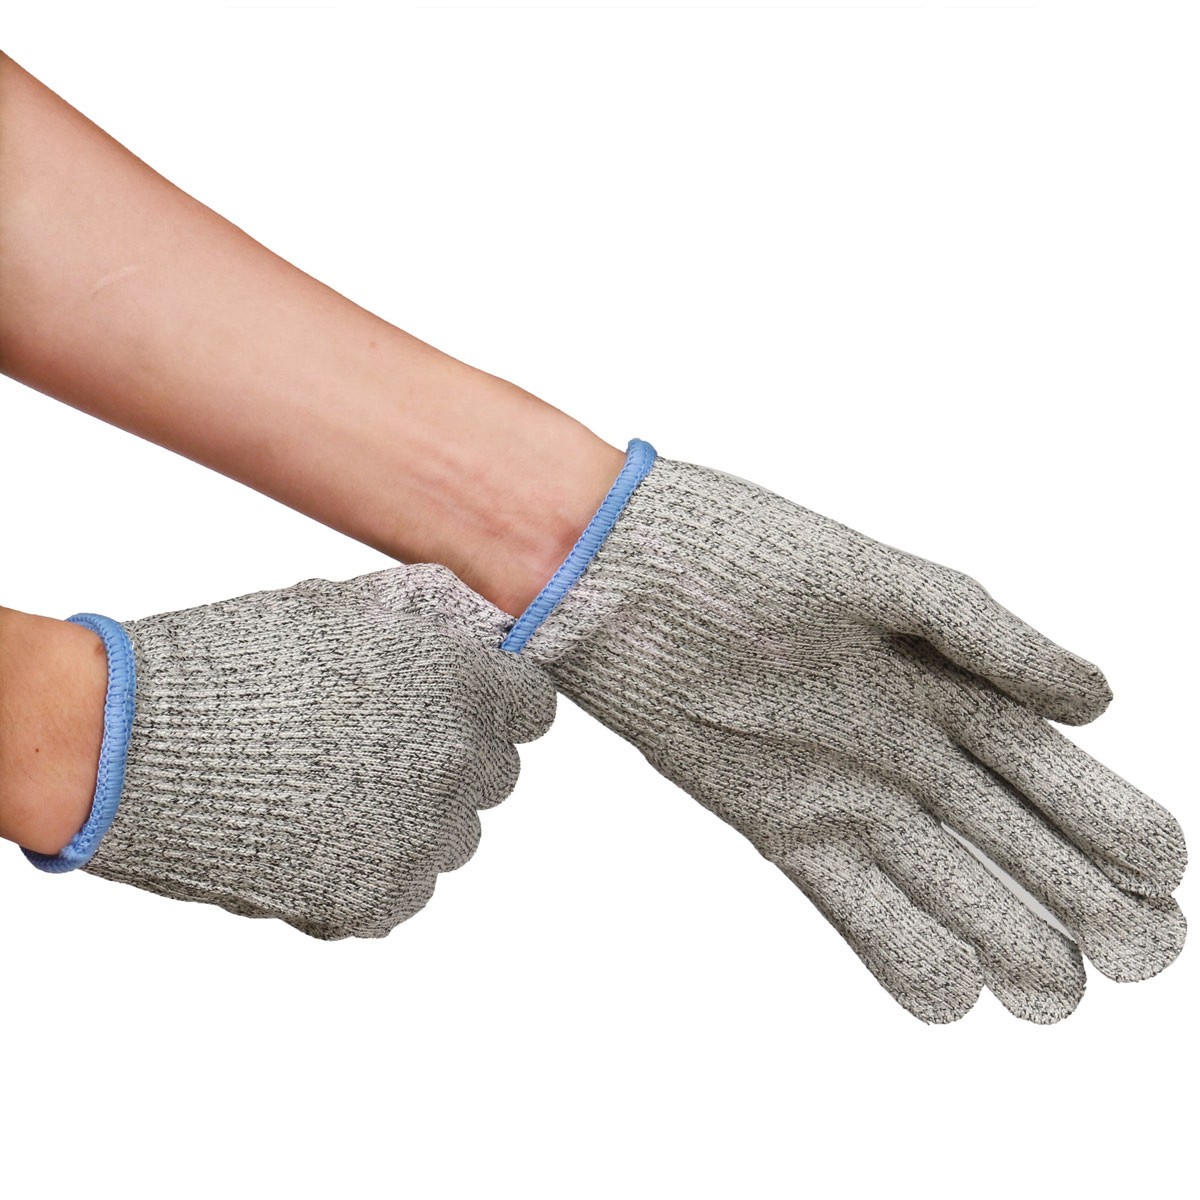 1-Pair-Safety-Stab-Anti-Slash-Resistant-Gloves-Level-5-Protection-1066793